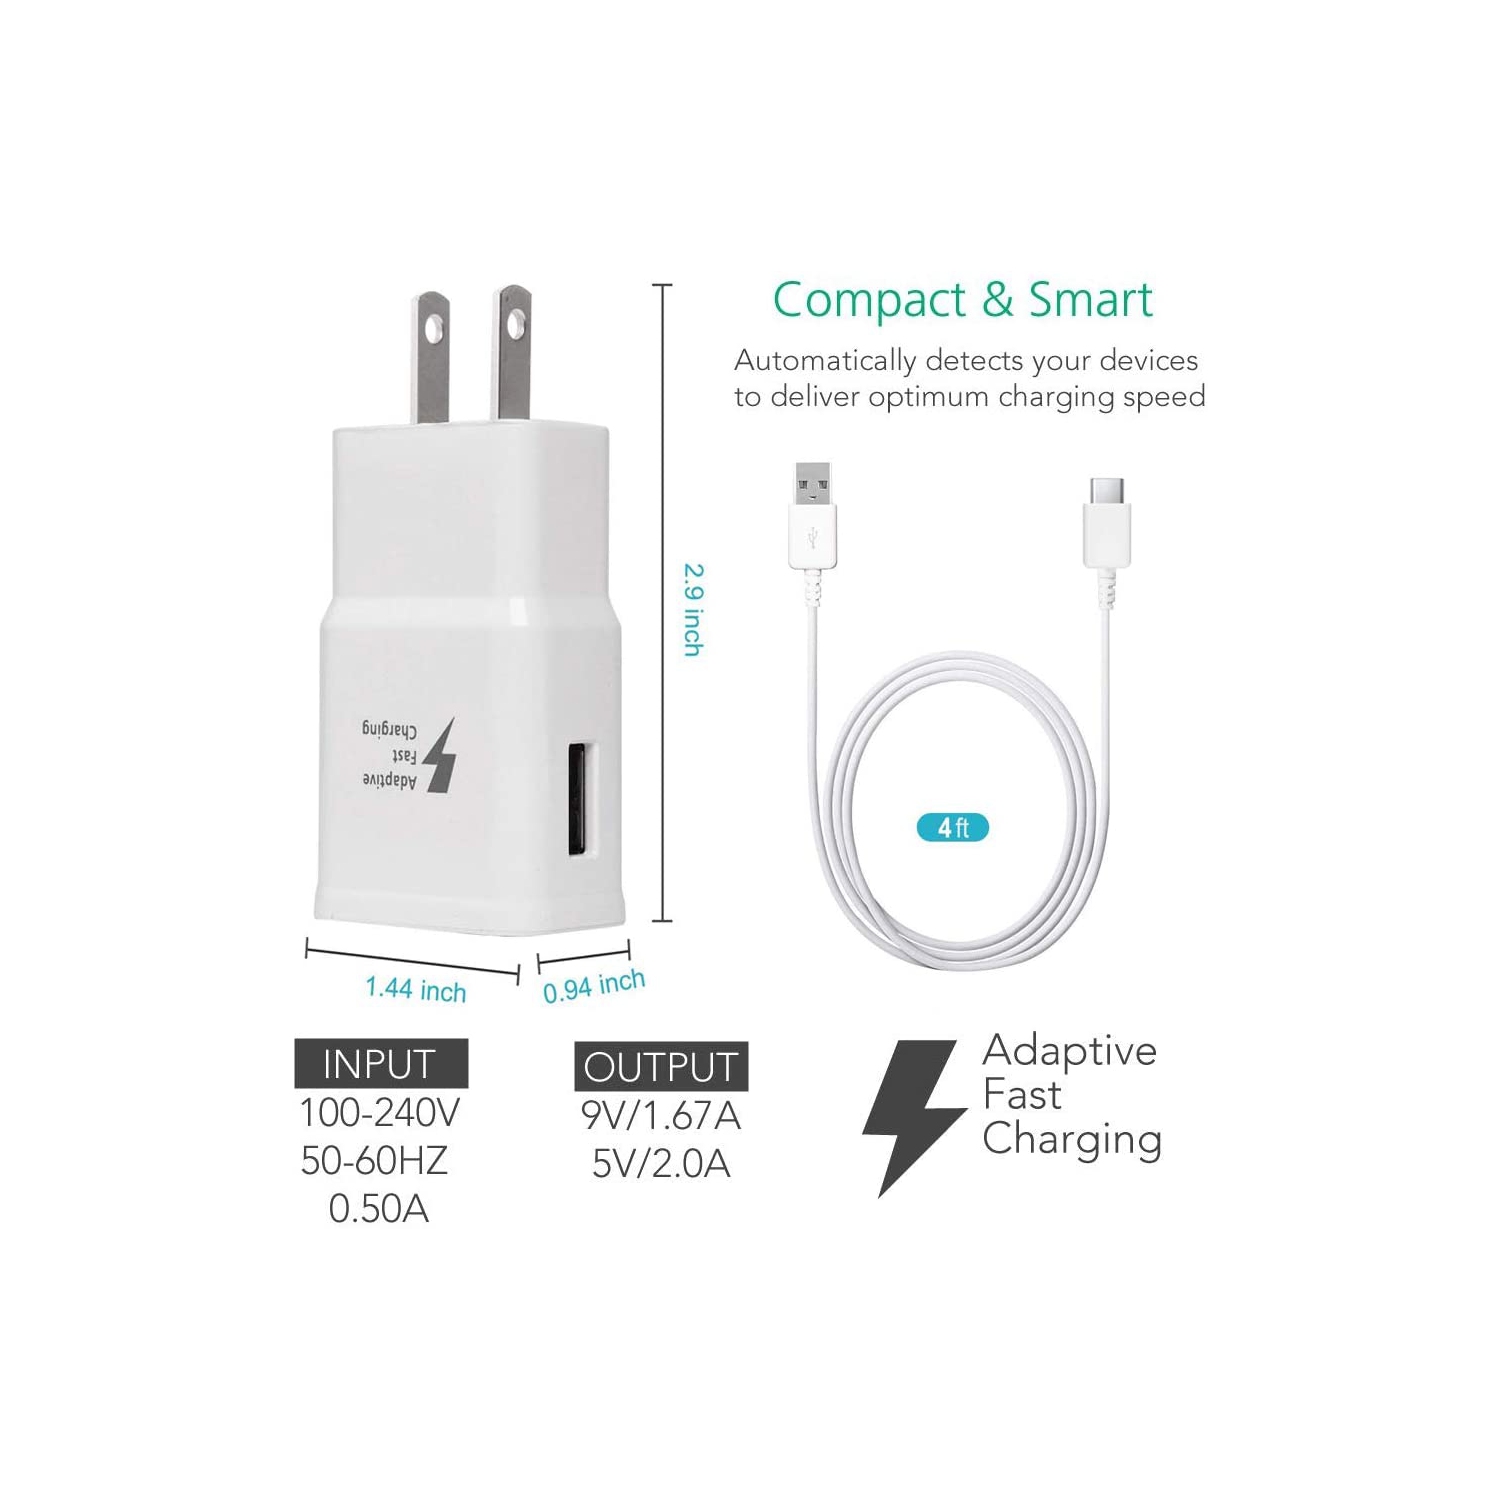 (CABLESHARK )Samsung COMPATIBLE Adaptive Fast Charger Kit, Quick Charge USB Wall Charger for Samsung Galaxy S10/S9/S8/S8 Plus/Note8/9{2 Type-C Cables + 2 Wall Chargers}Charge up to 50% Faster (White)